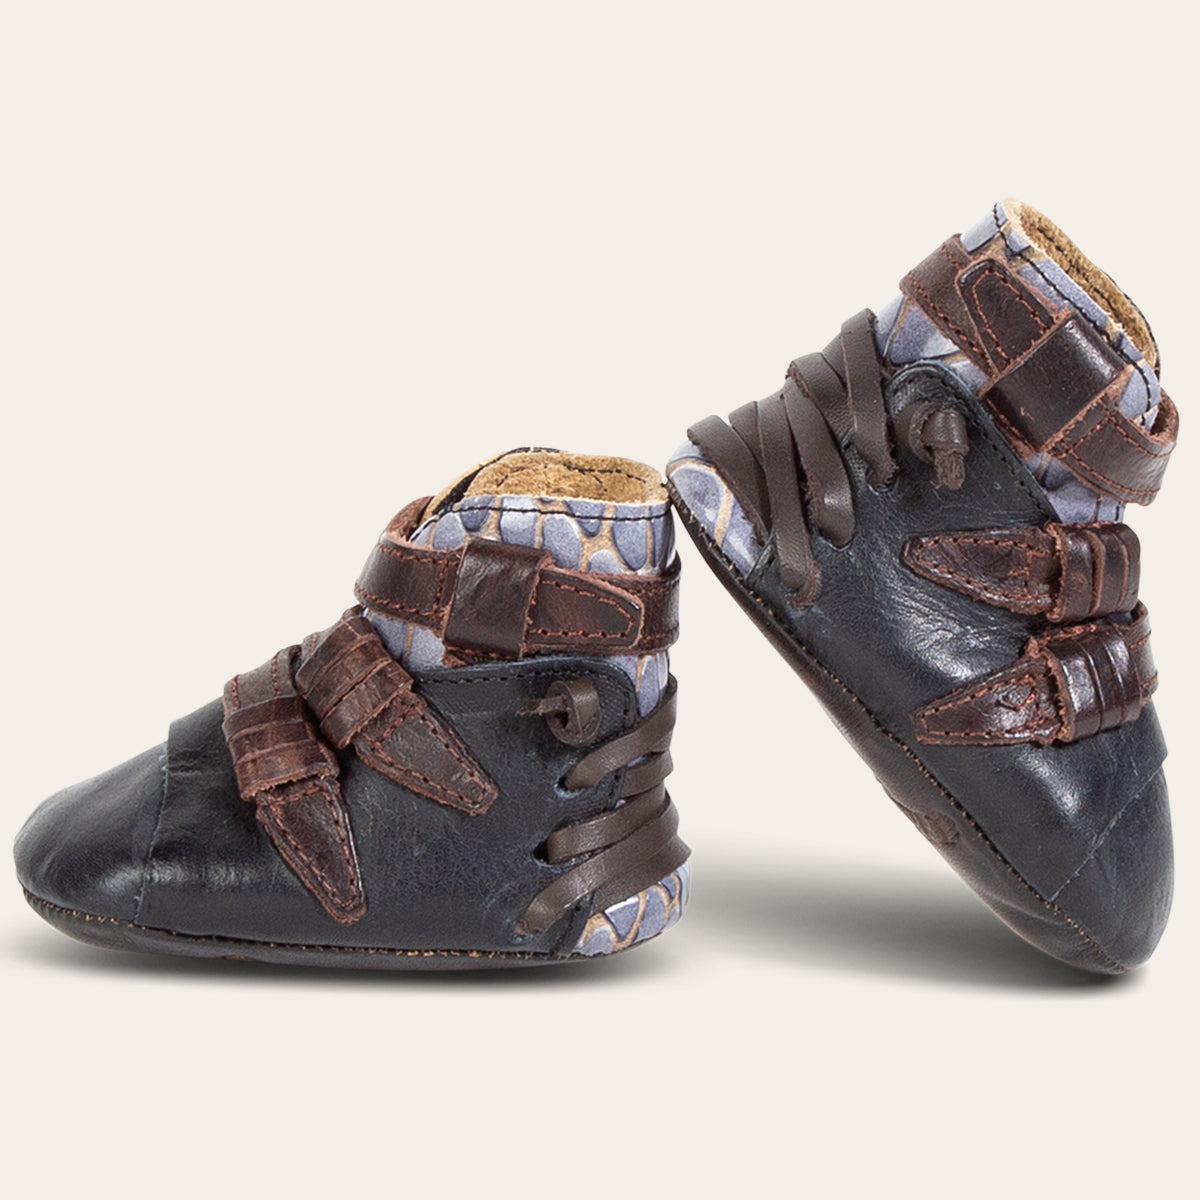 side view showing contrasting back lace and side strap detailing on FREEBIRD infant baby crue navy multi leather bootie